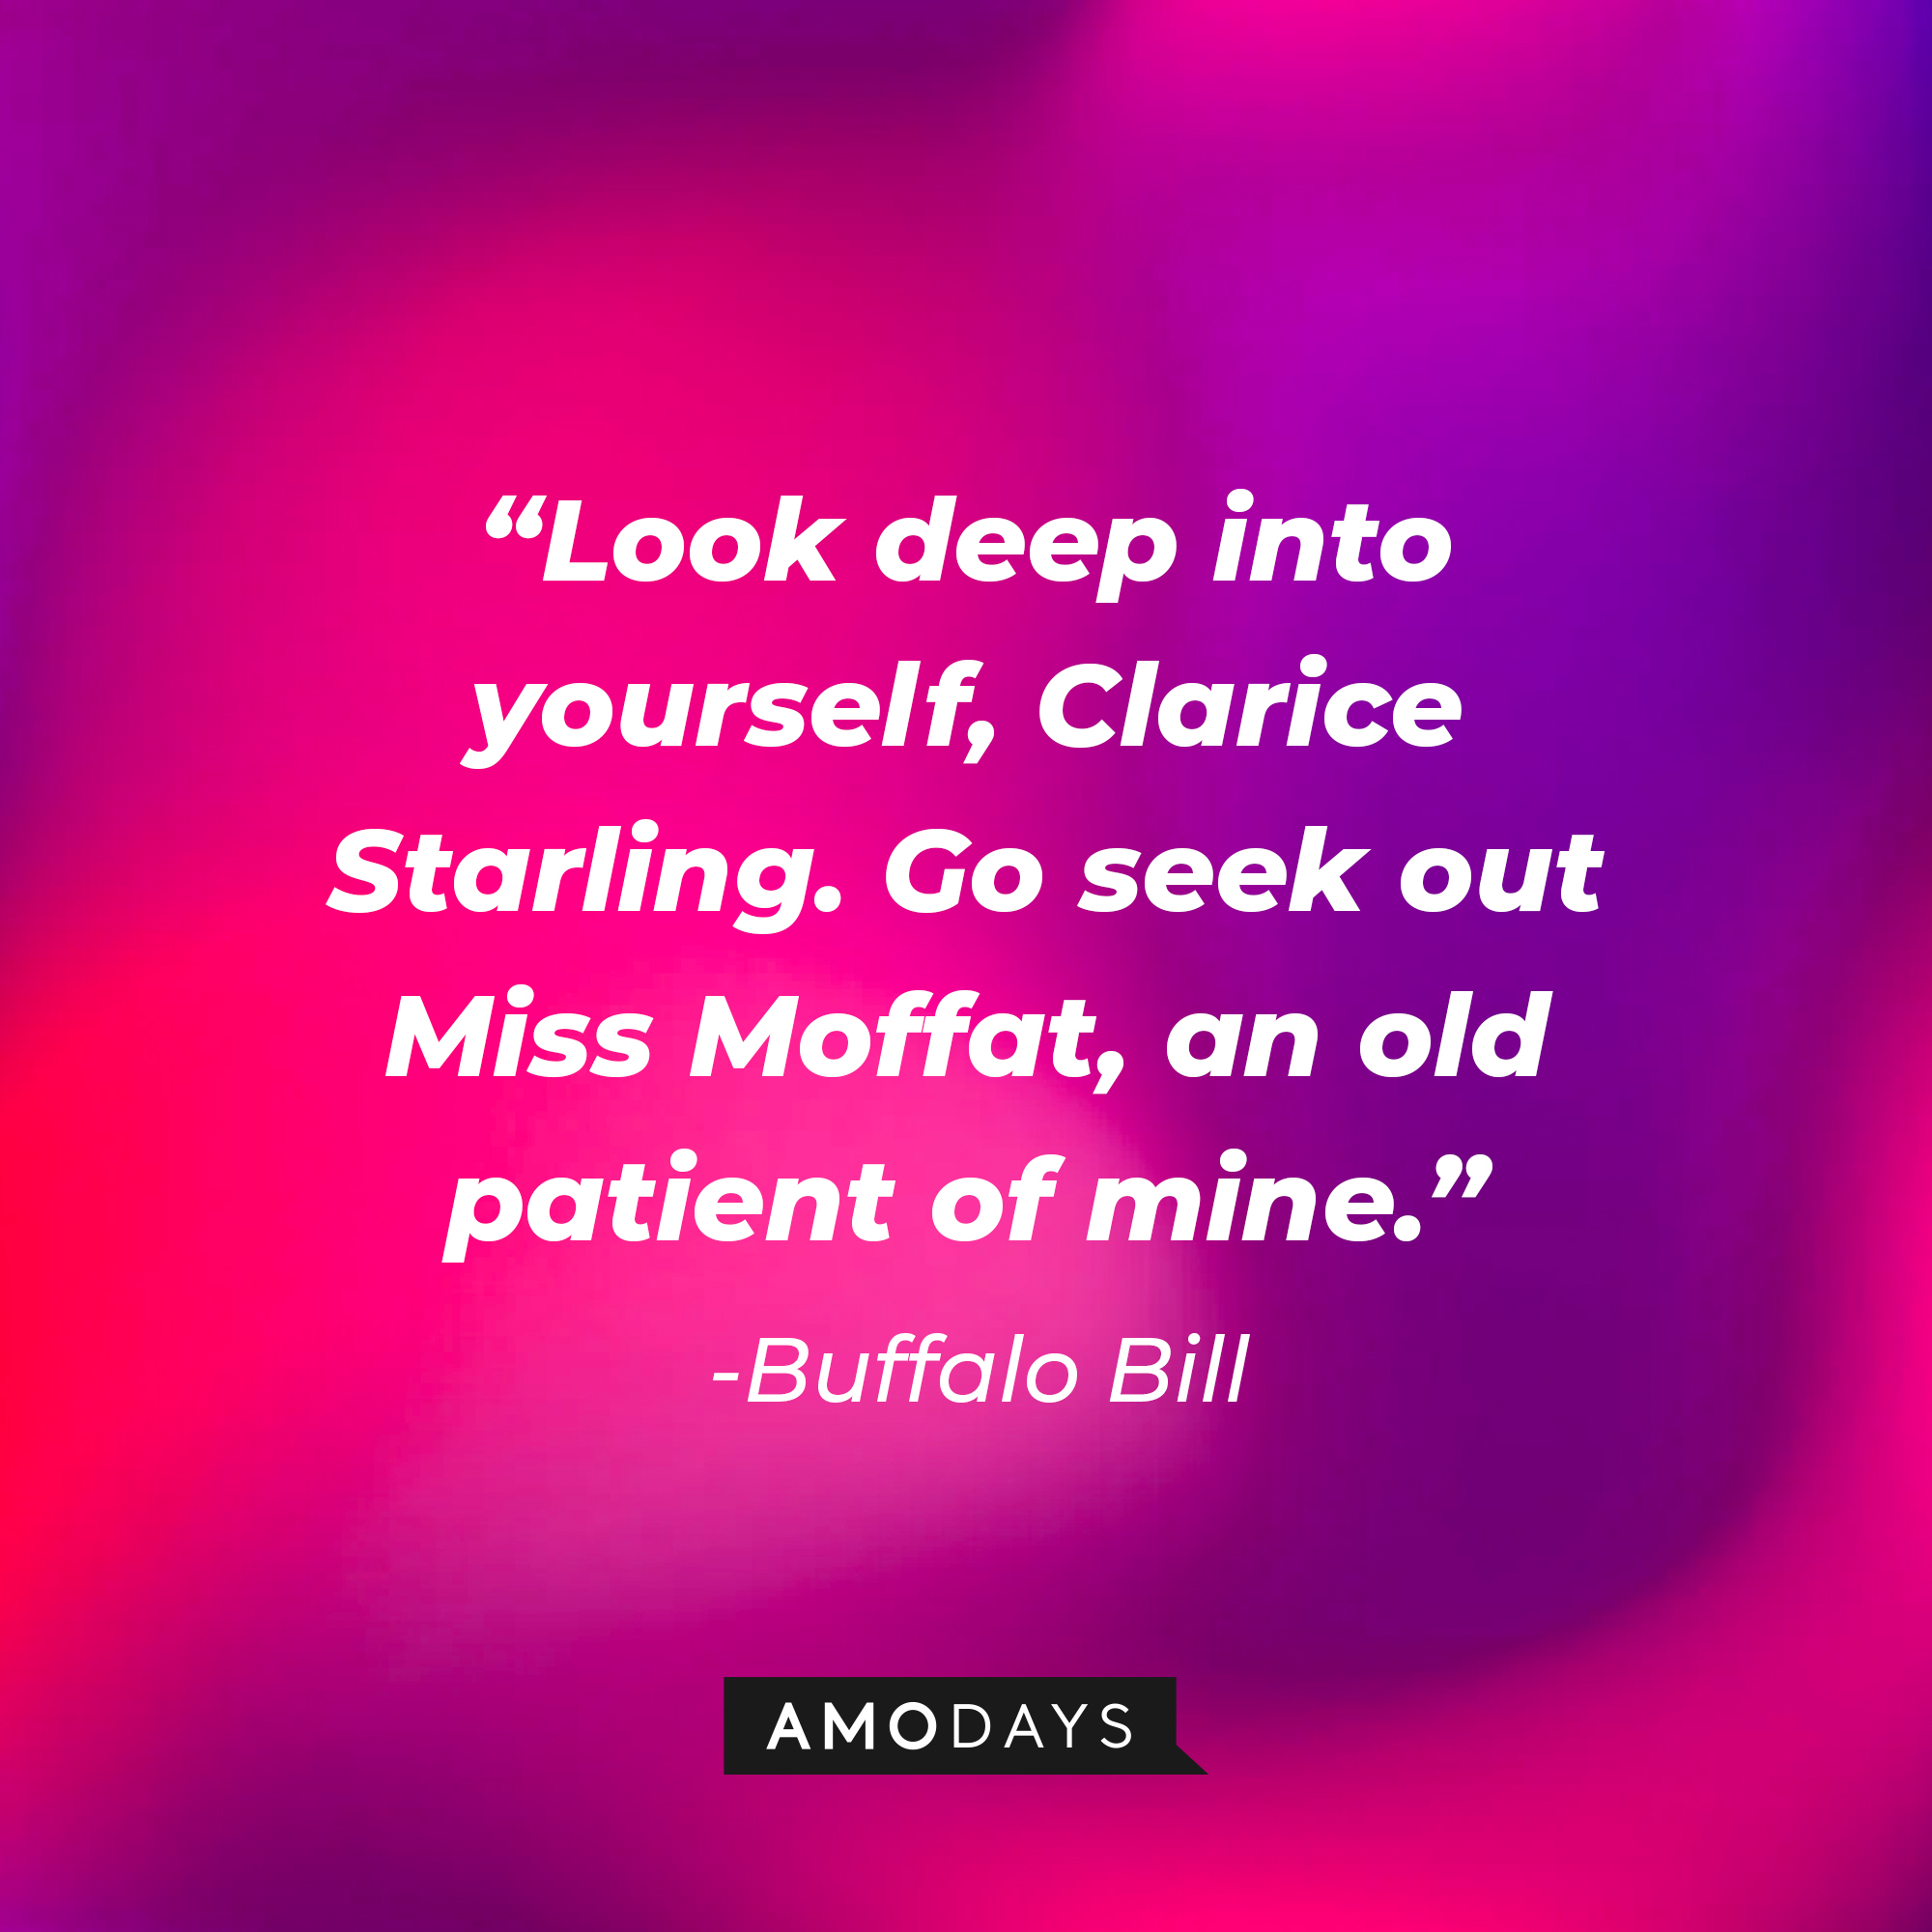 Buffalo Bill's quote from "The Silence of the Lambs:" "Look deep into yourself, Clarice Starling. Go seek out Miss Moffat, an old patient of mine." | Source: AmoDays